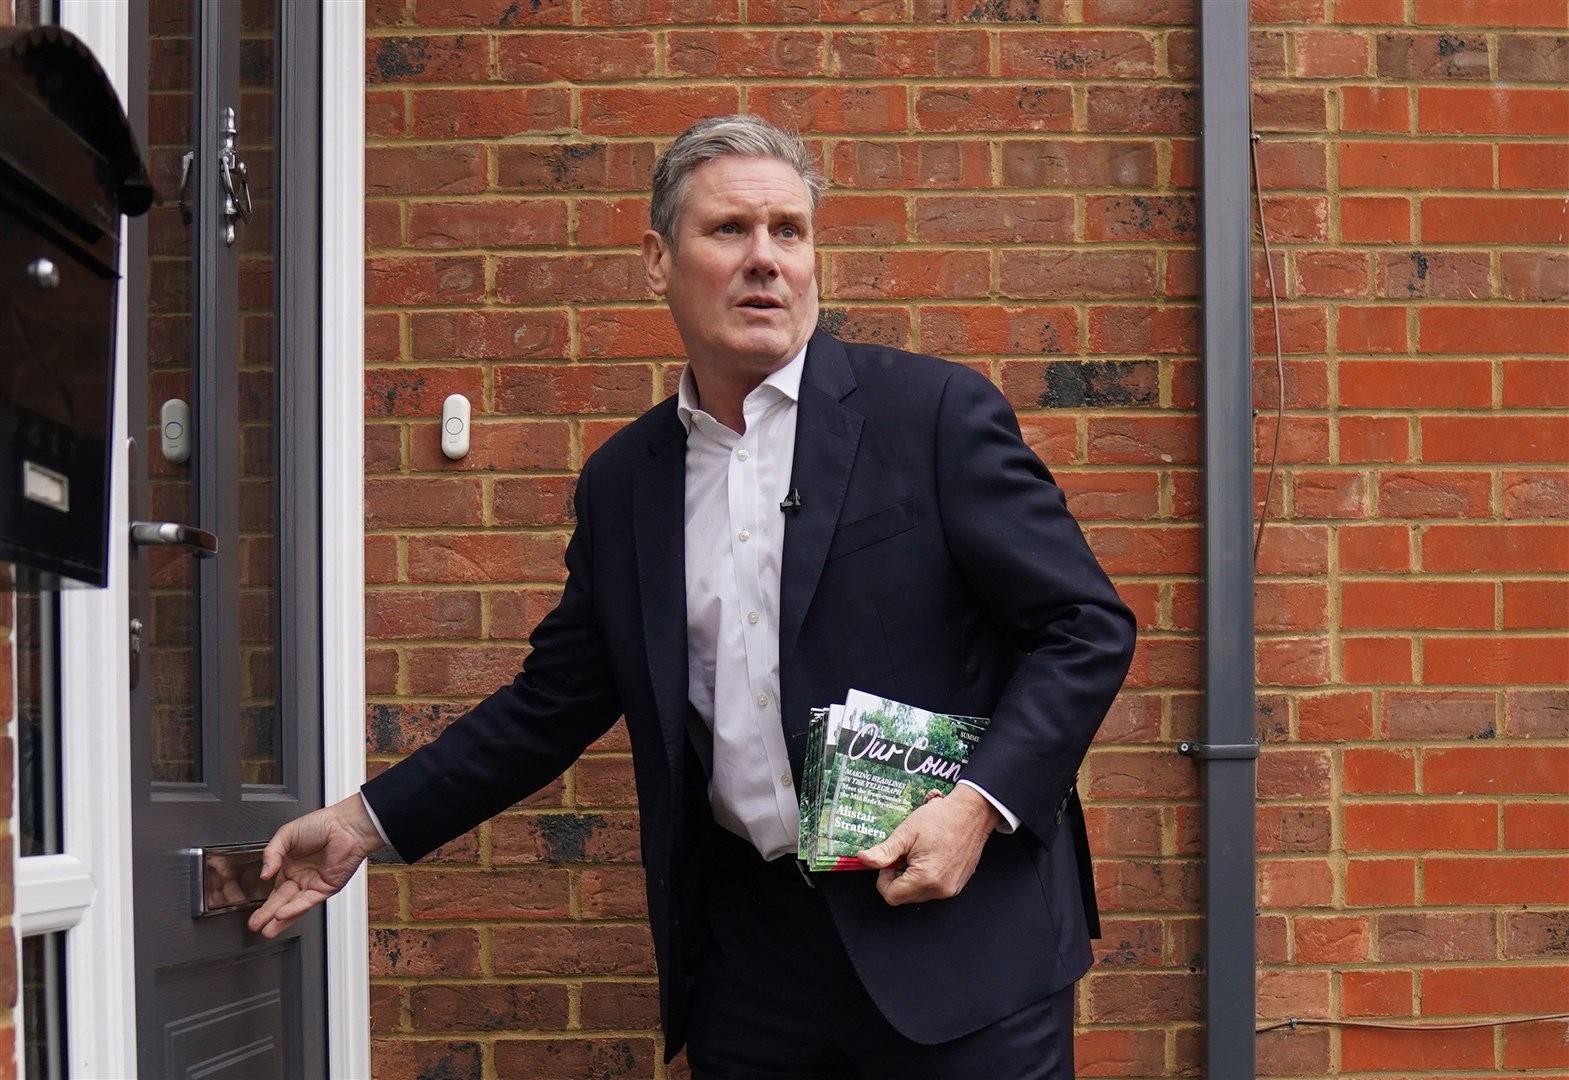 Labour leader Sir Keir Starmer has been canvassing in Mid Bedfordshire ahead of the by-election (Jacob King/PA)